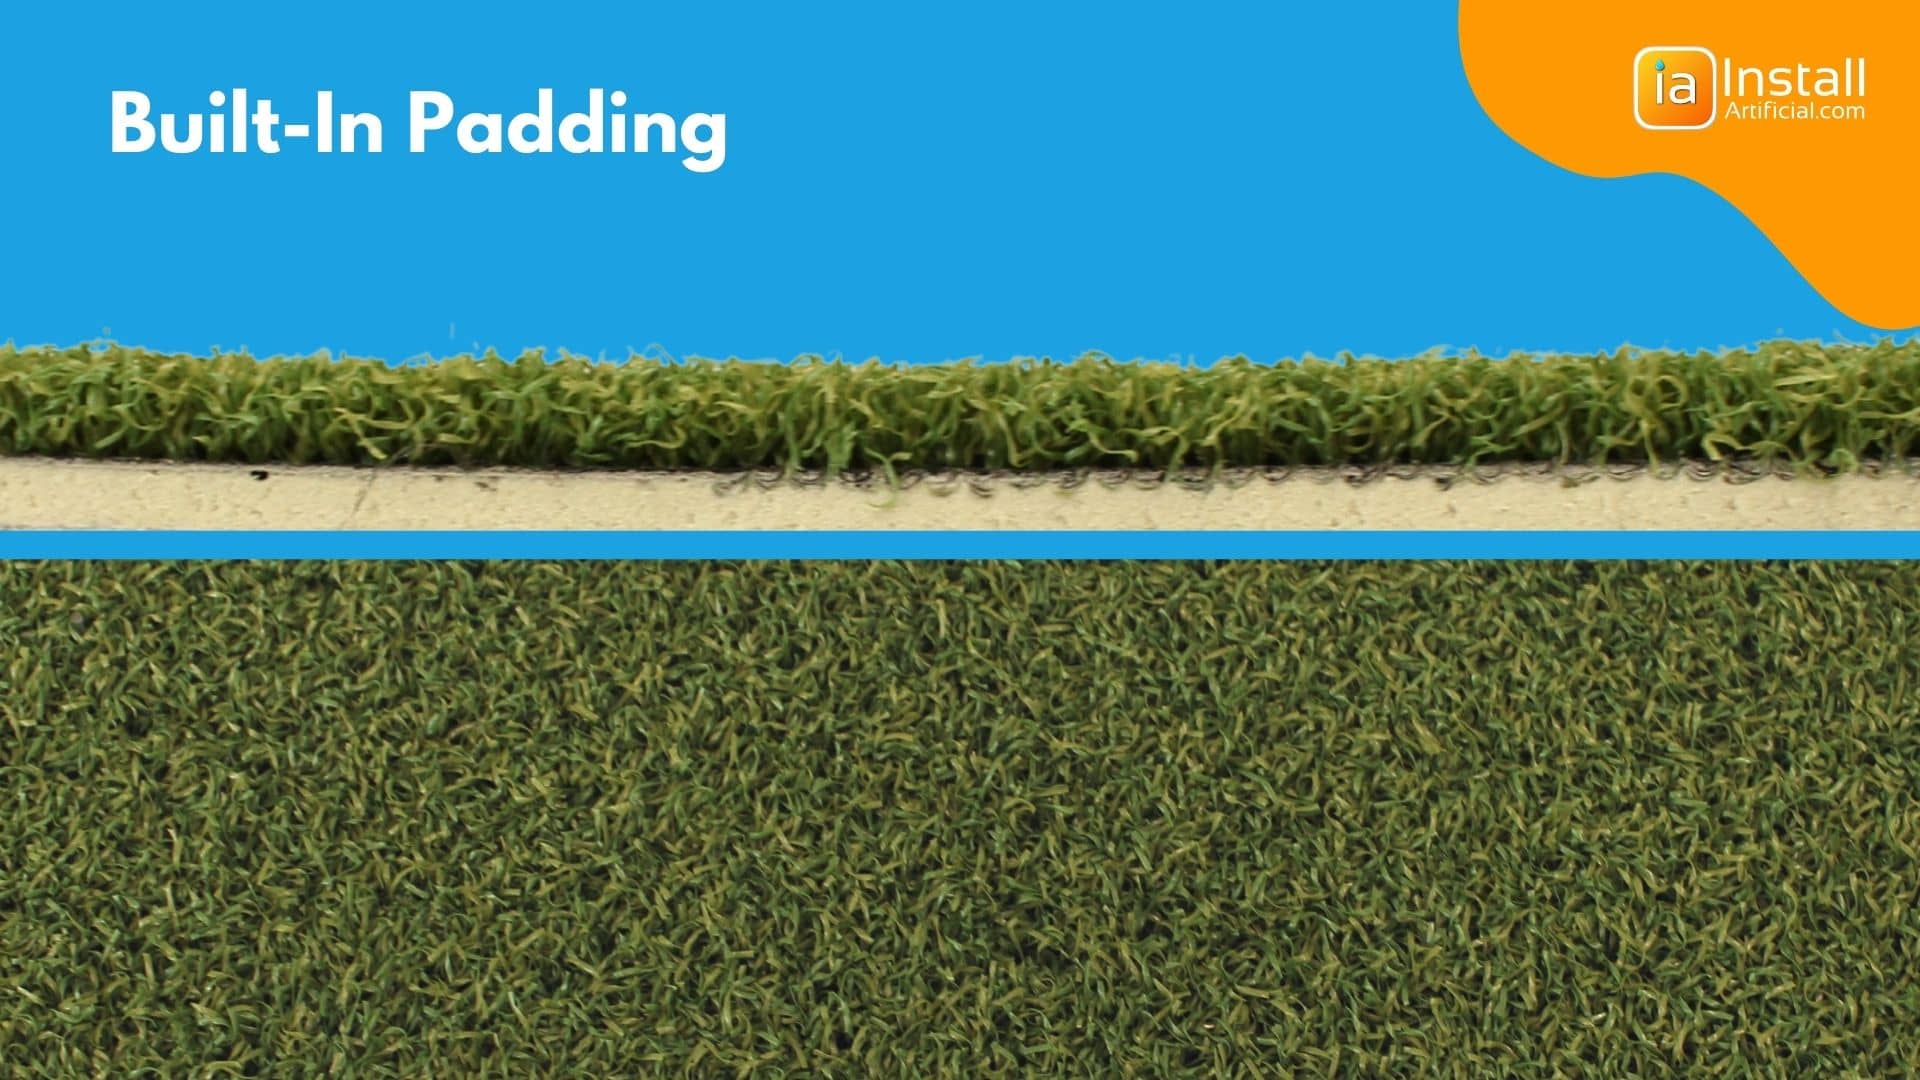 Artificial Sports Turf with Built In Padding